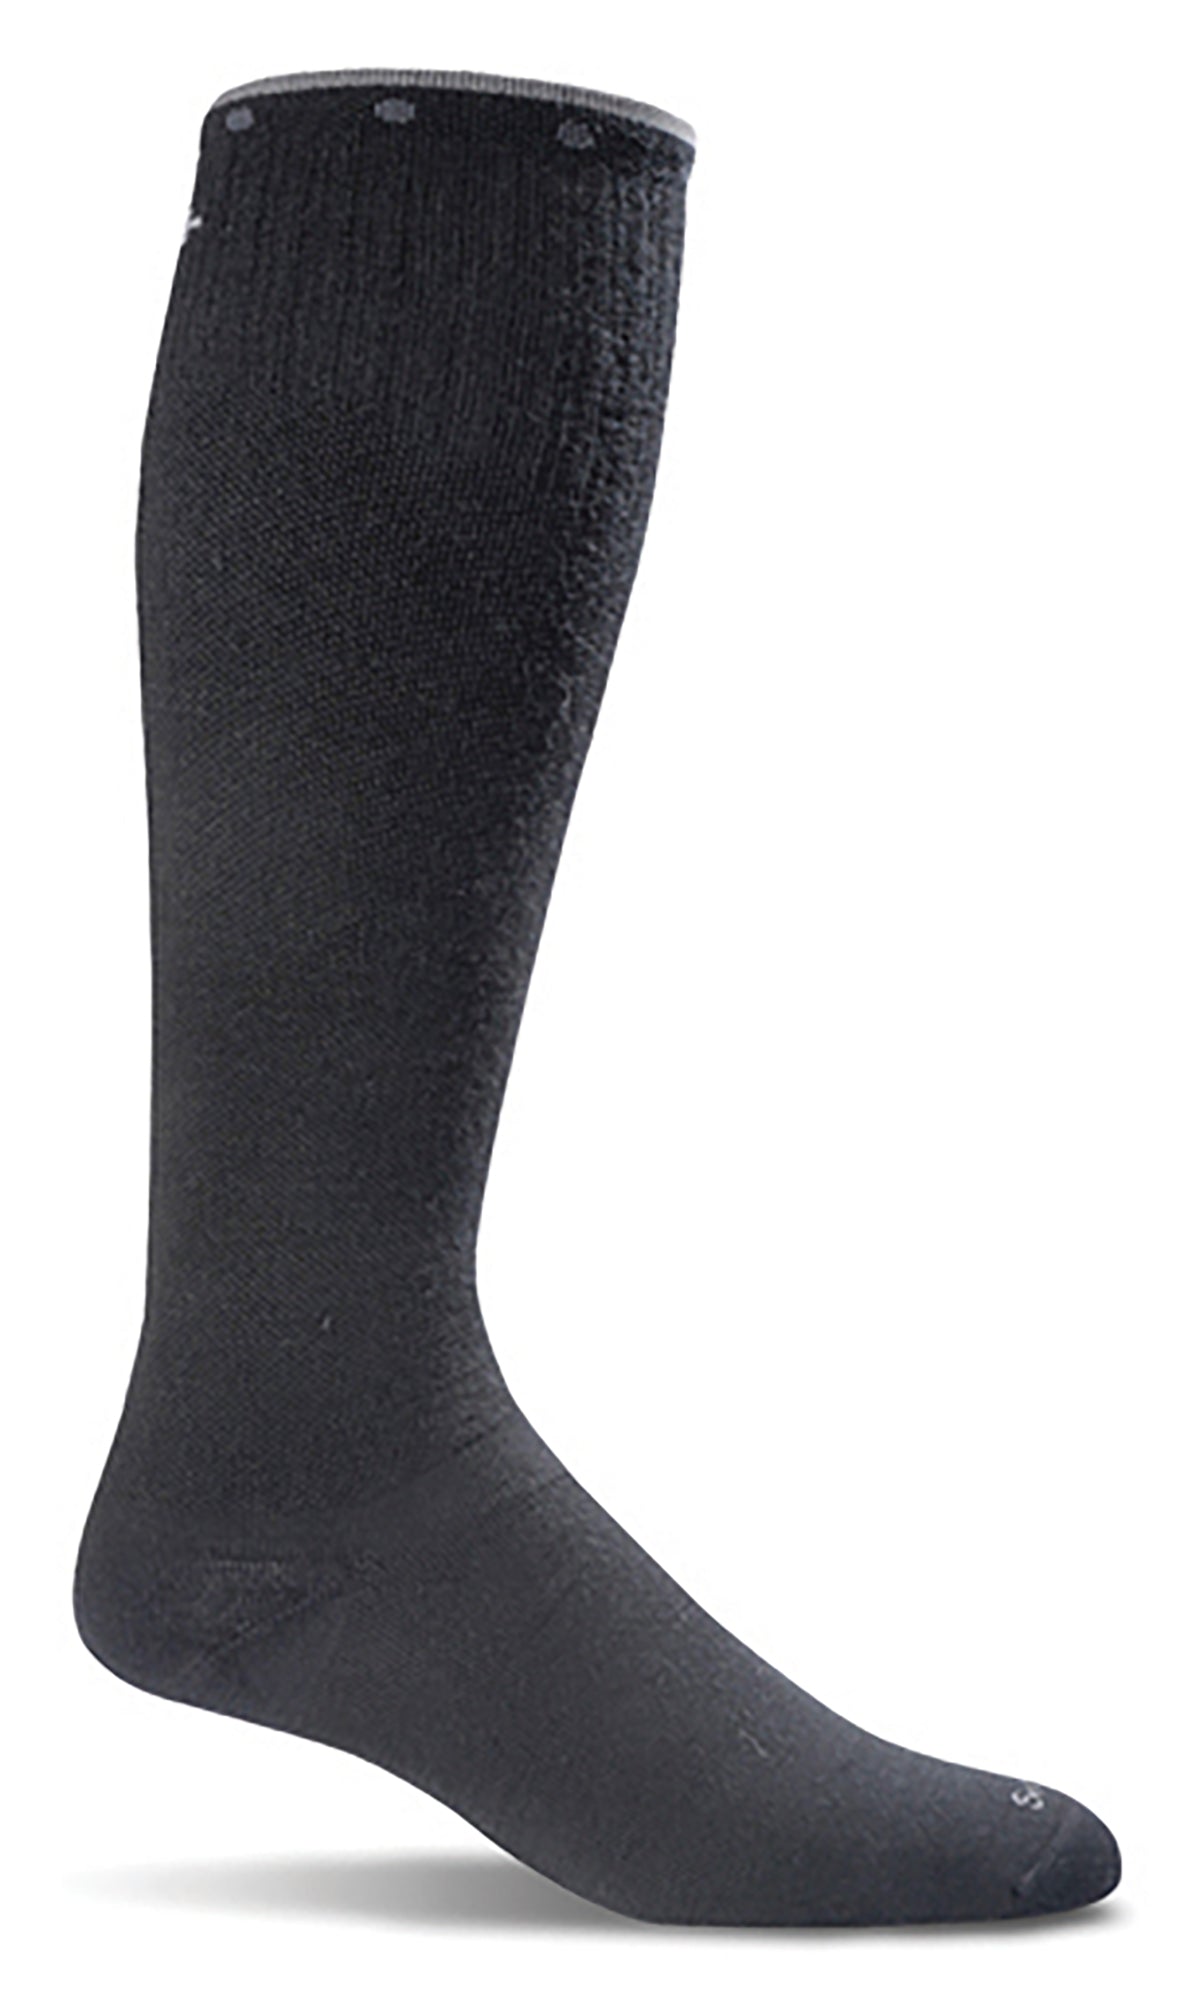 Sockwell Women's On the Spot Sock in Black color from the side